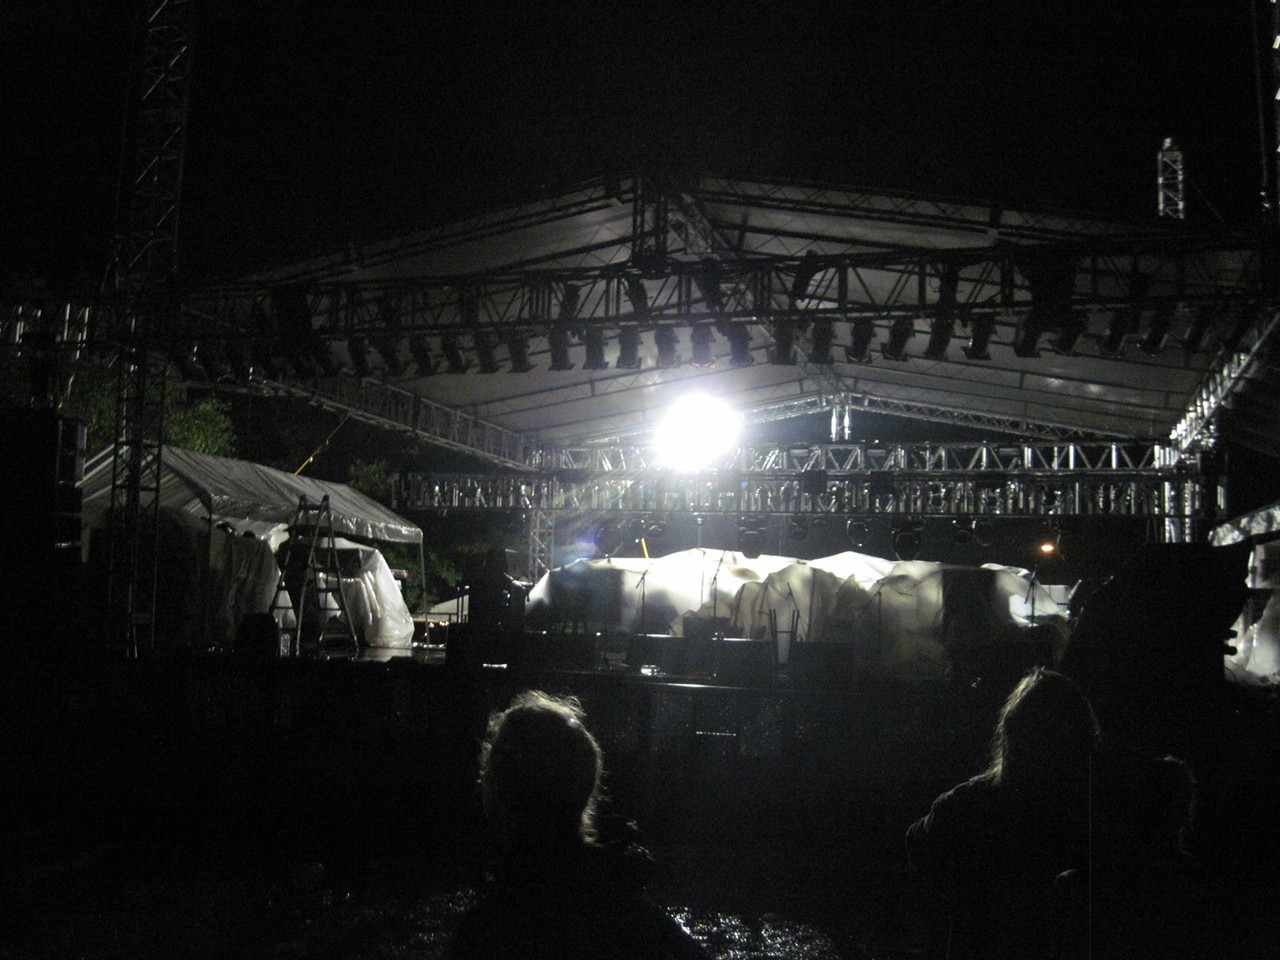 The main stage was lowered and shut down during the rainstorm.